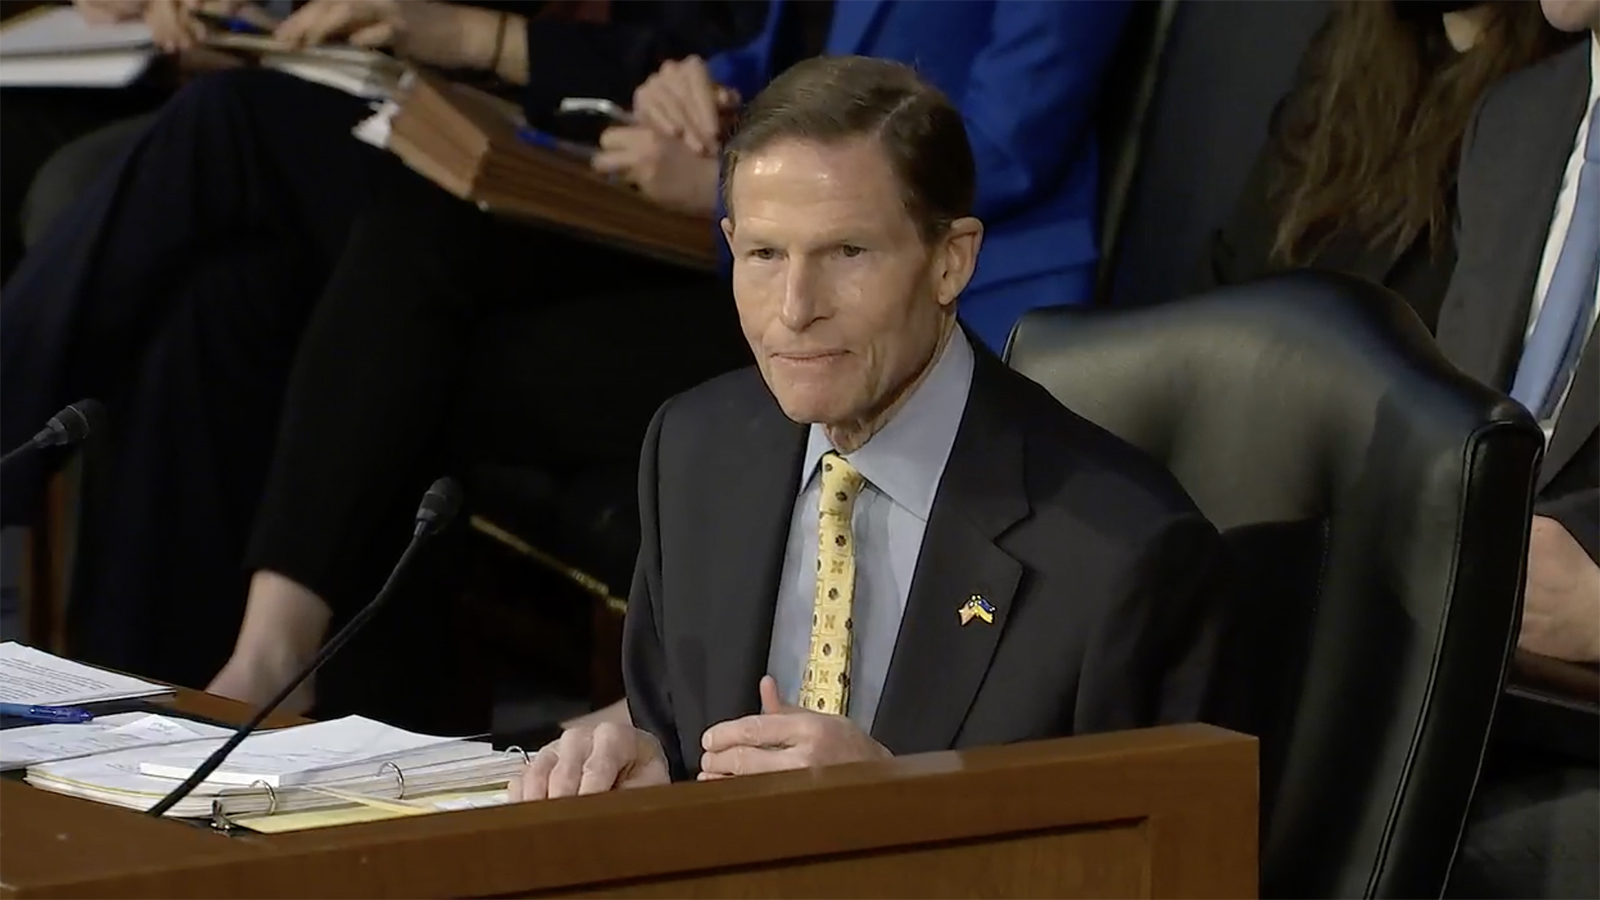 Sen. Richard Blumenthal, as he said to president and CFO of Live Nation, Joe Berchtold: "Look in the mirror and say, ‘I’m the problem. It’s me."